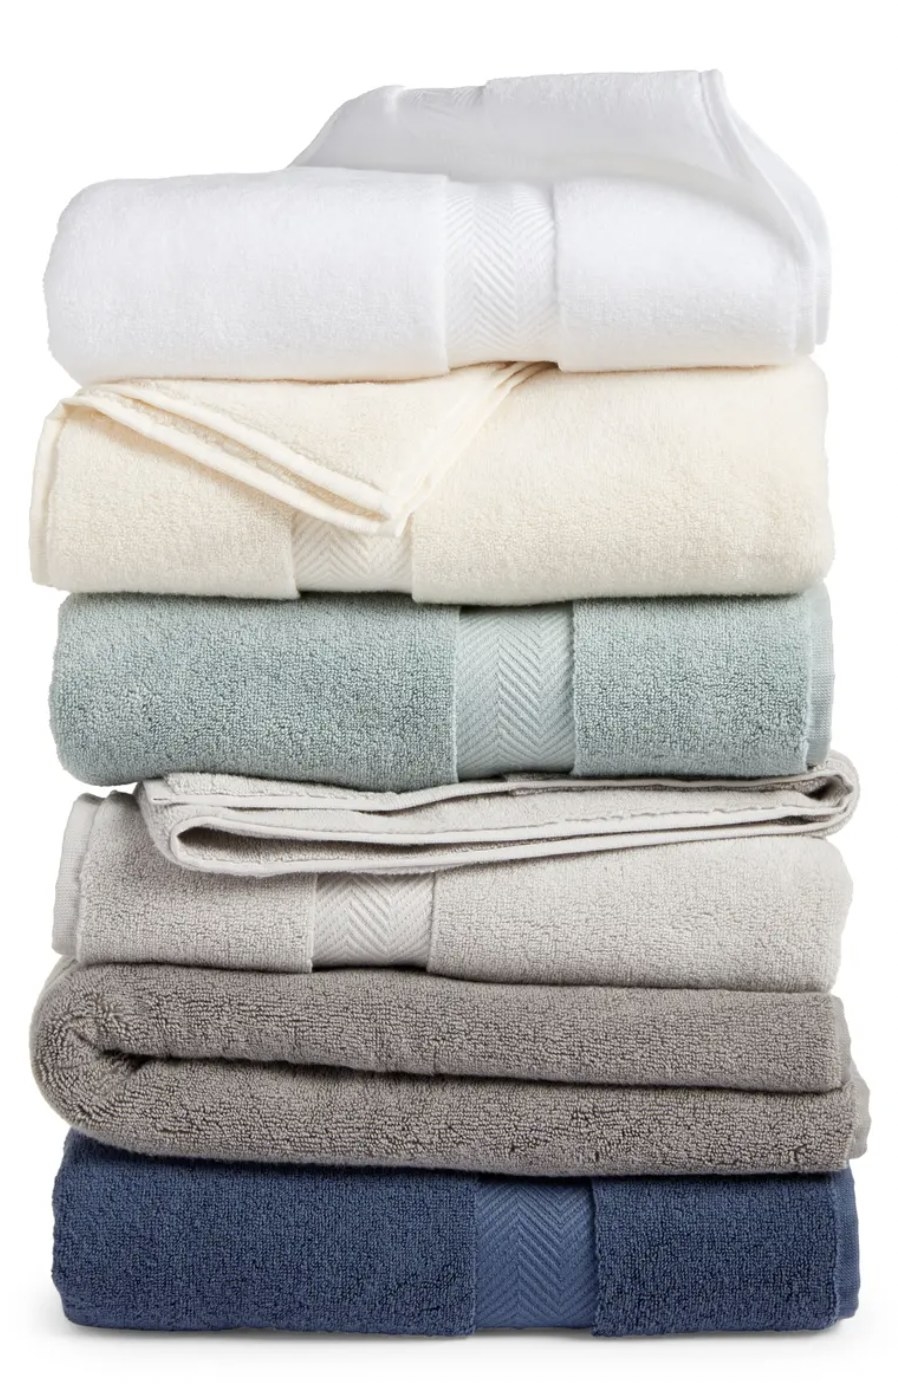 A stack of different colored towels, including dark blue, teal, different shades of grey, cream and white